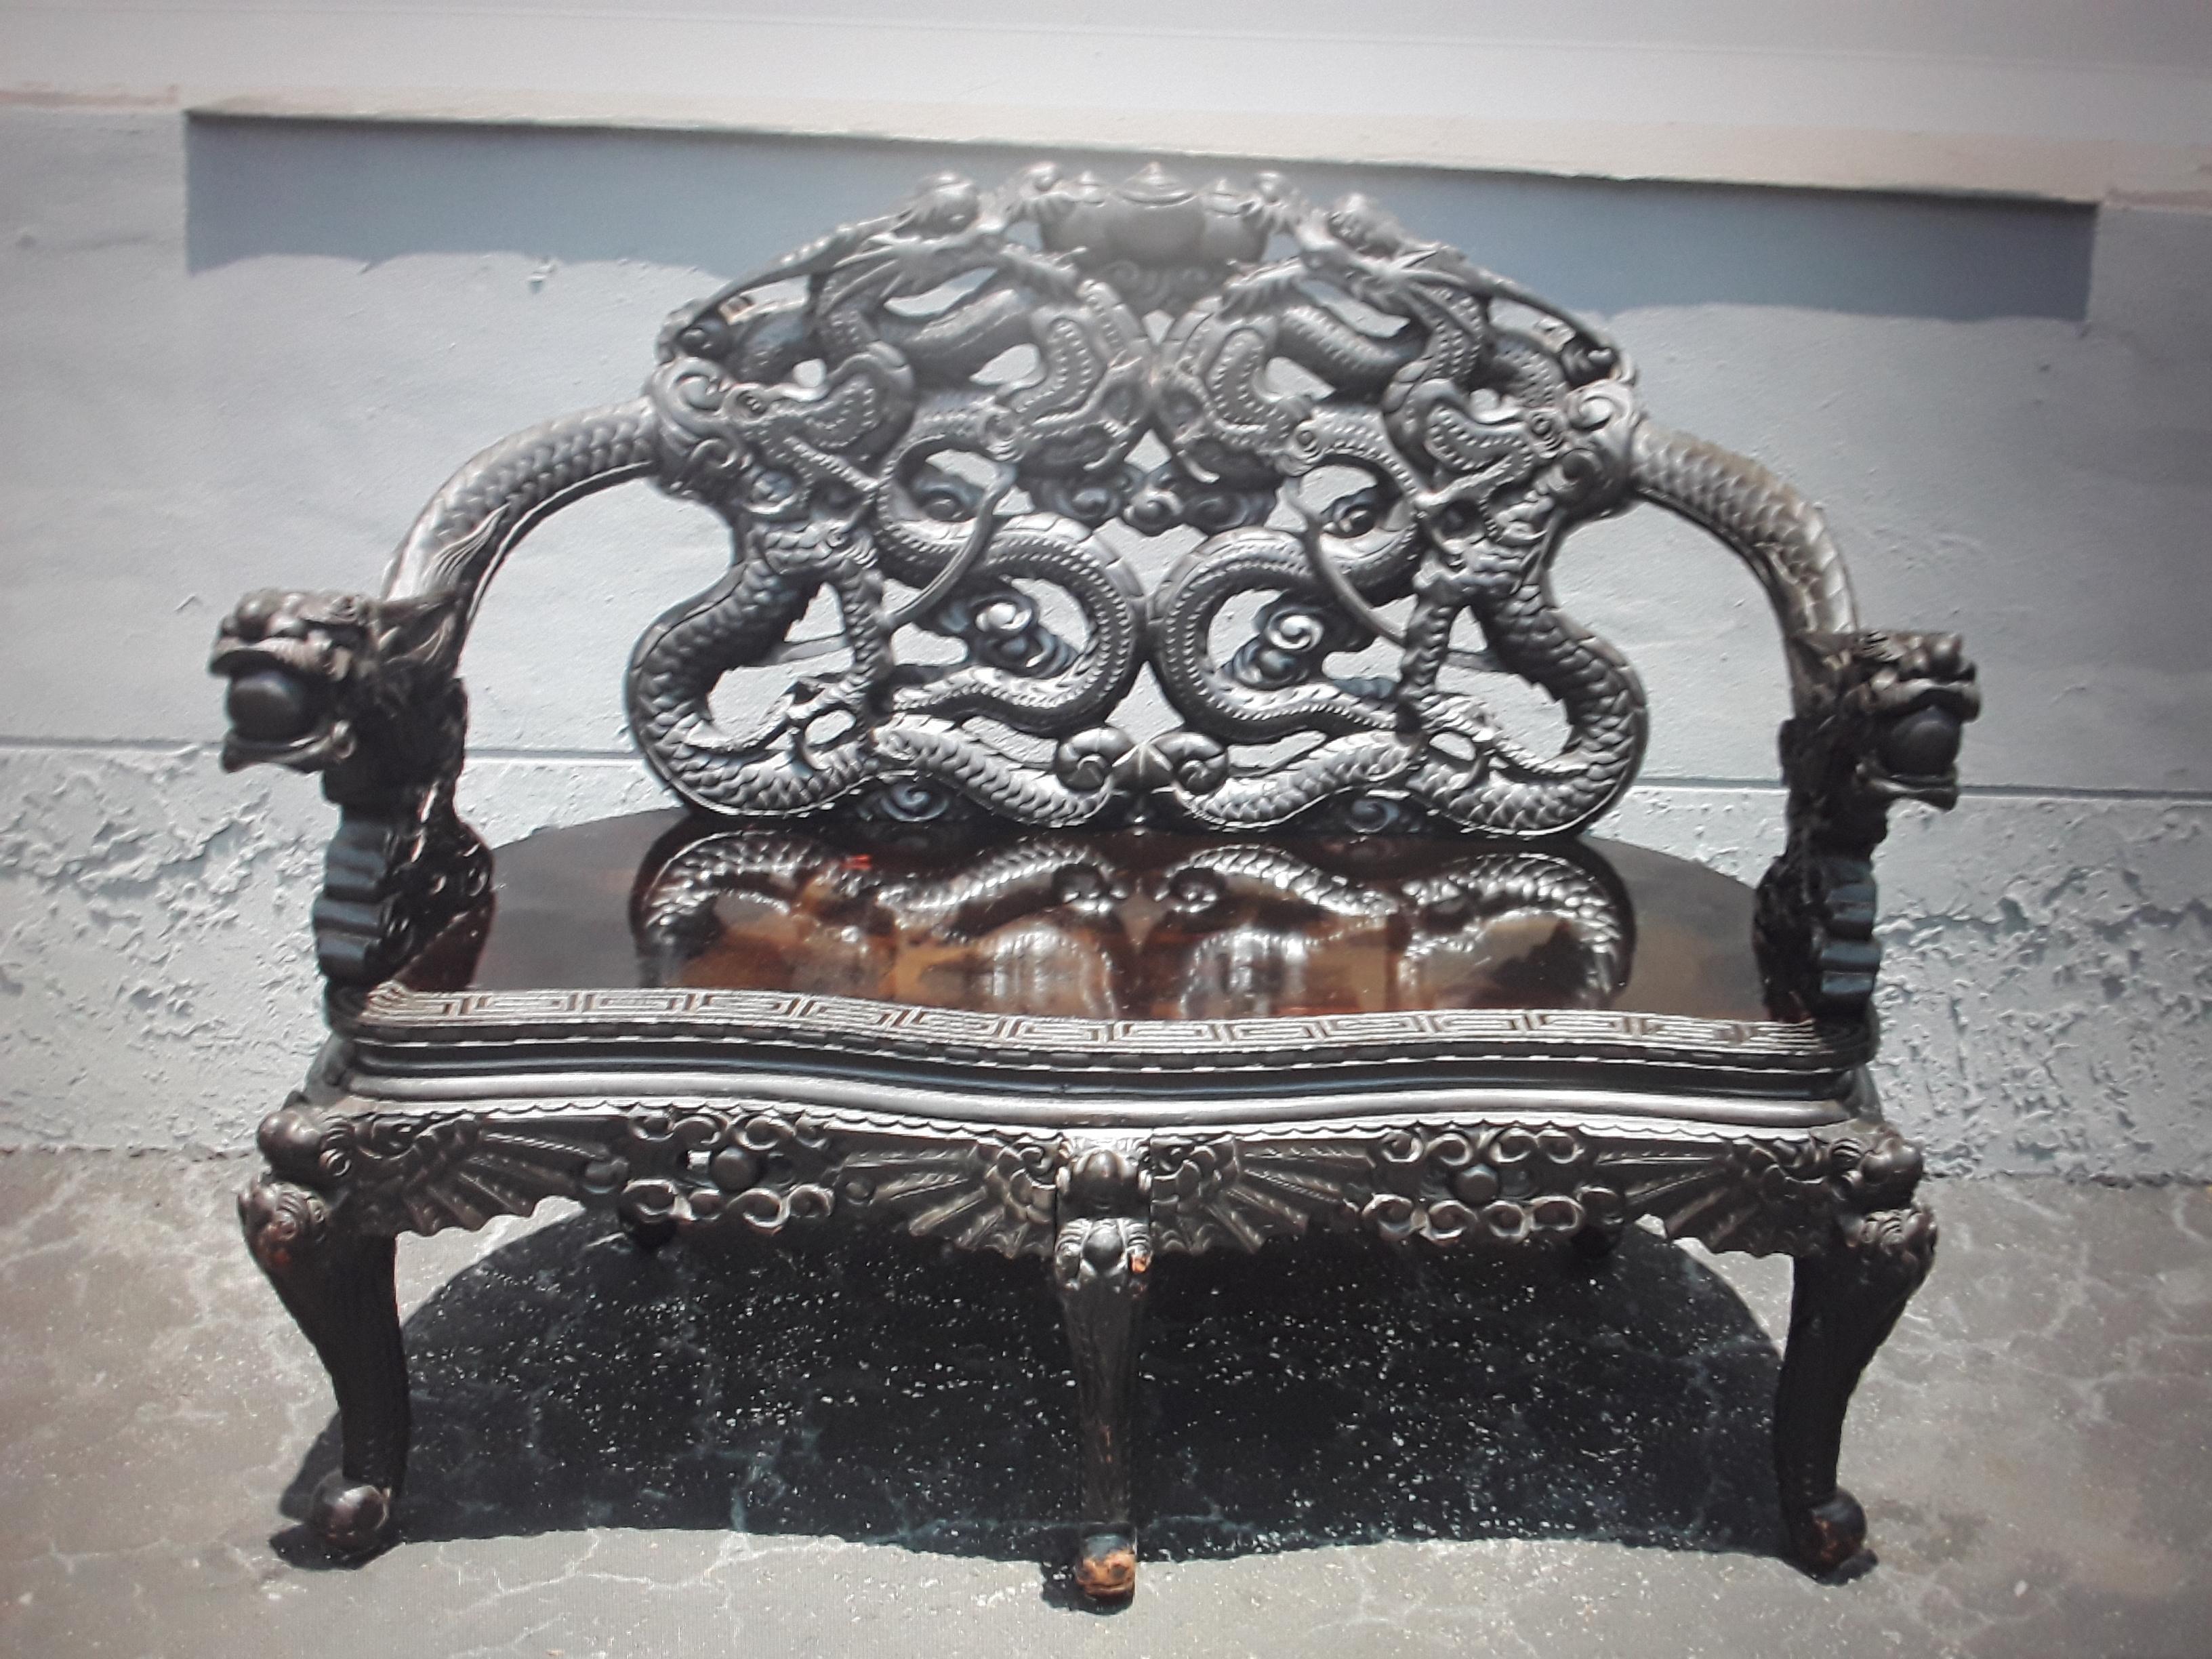 c1940's Chinoiserie/ Asian Carved and Ebonized Wood Sitting Bench. Amazing carving. Please look closely at pictures as they tell the details of the carvings.